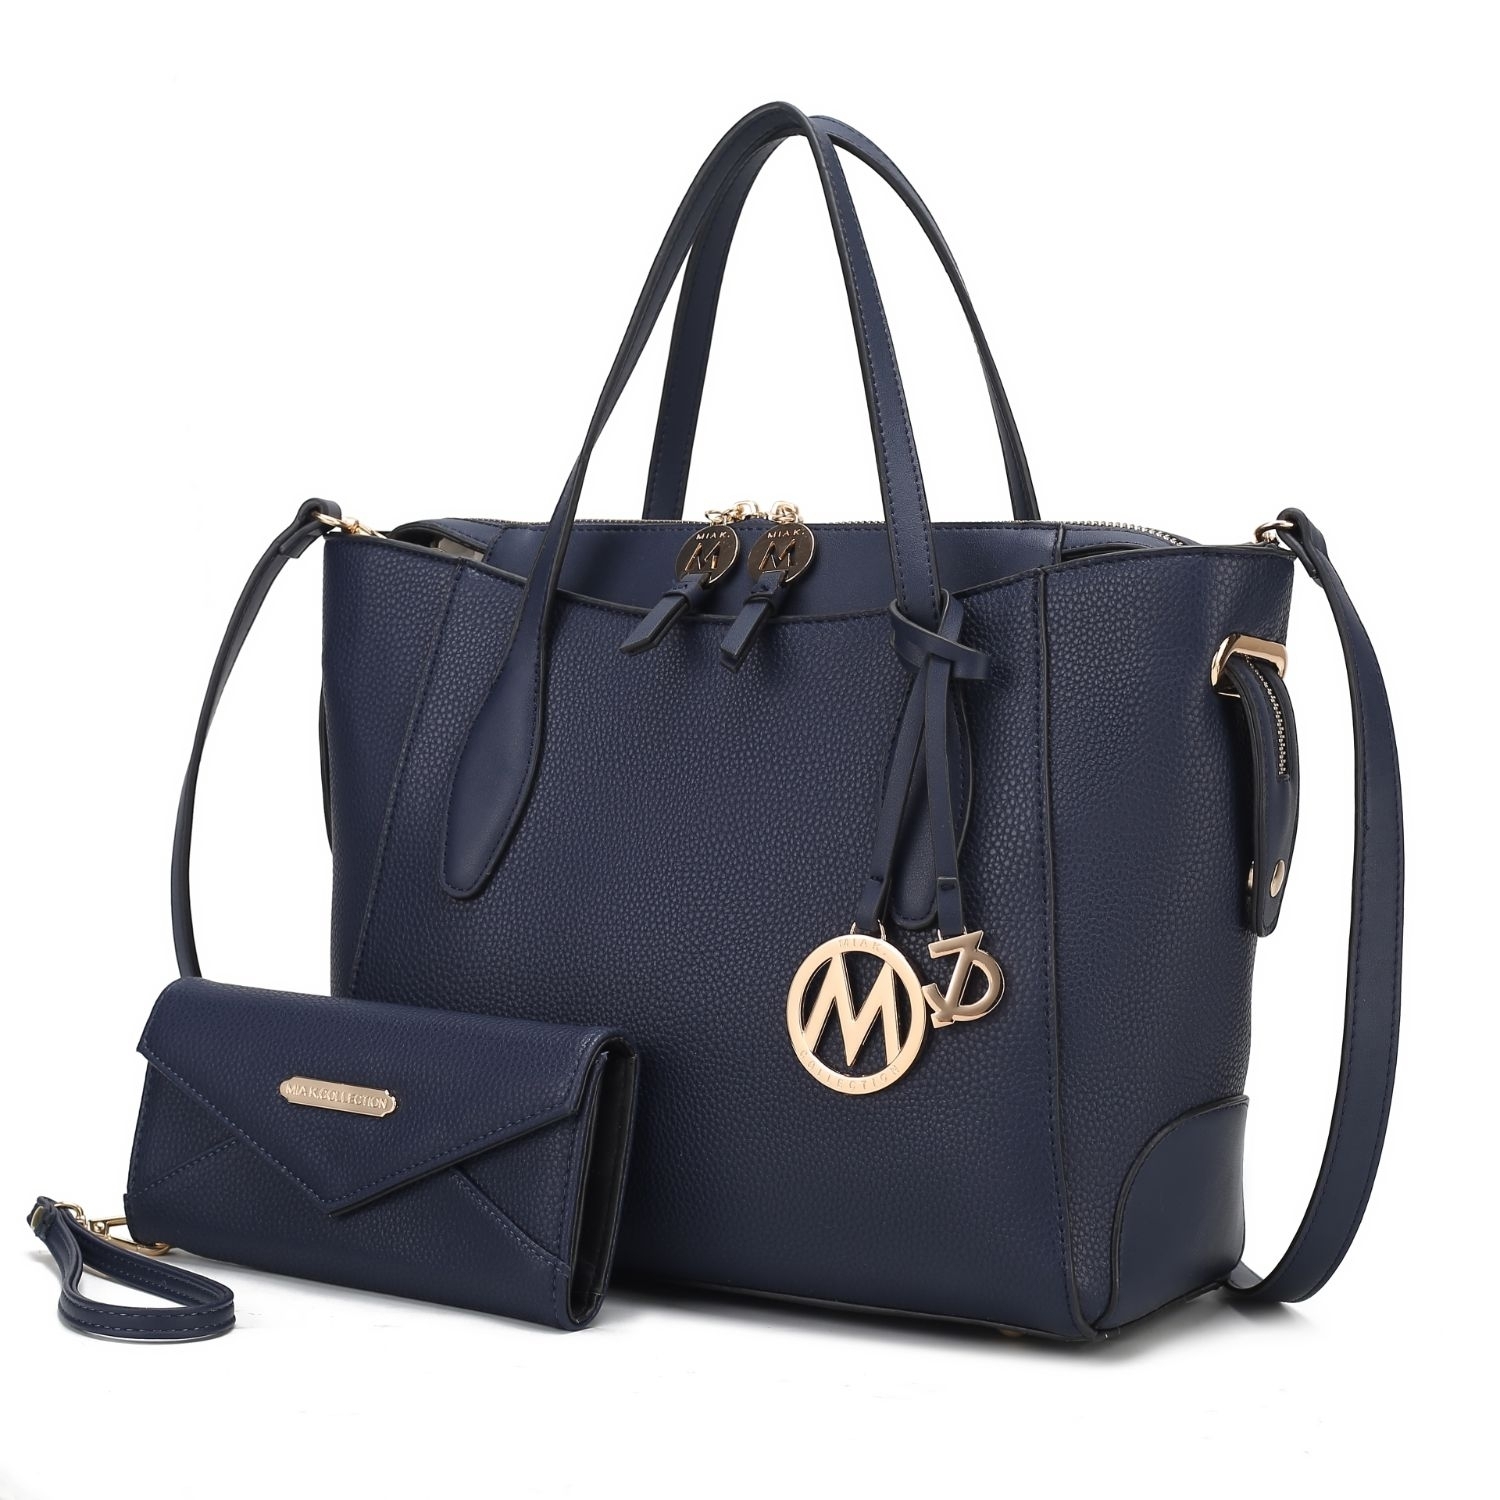 MKF Collection Bruna Vegan Leather Women's Tote Bag With Wallet -2 Pieces By Mia K - Navy